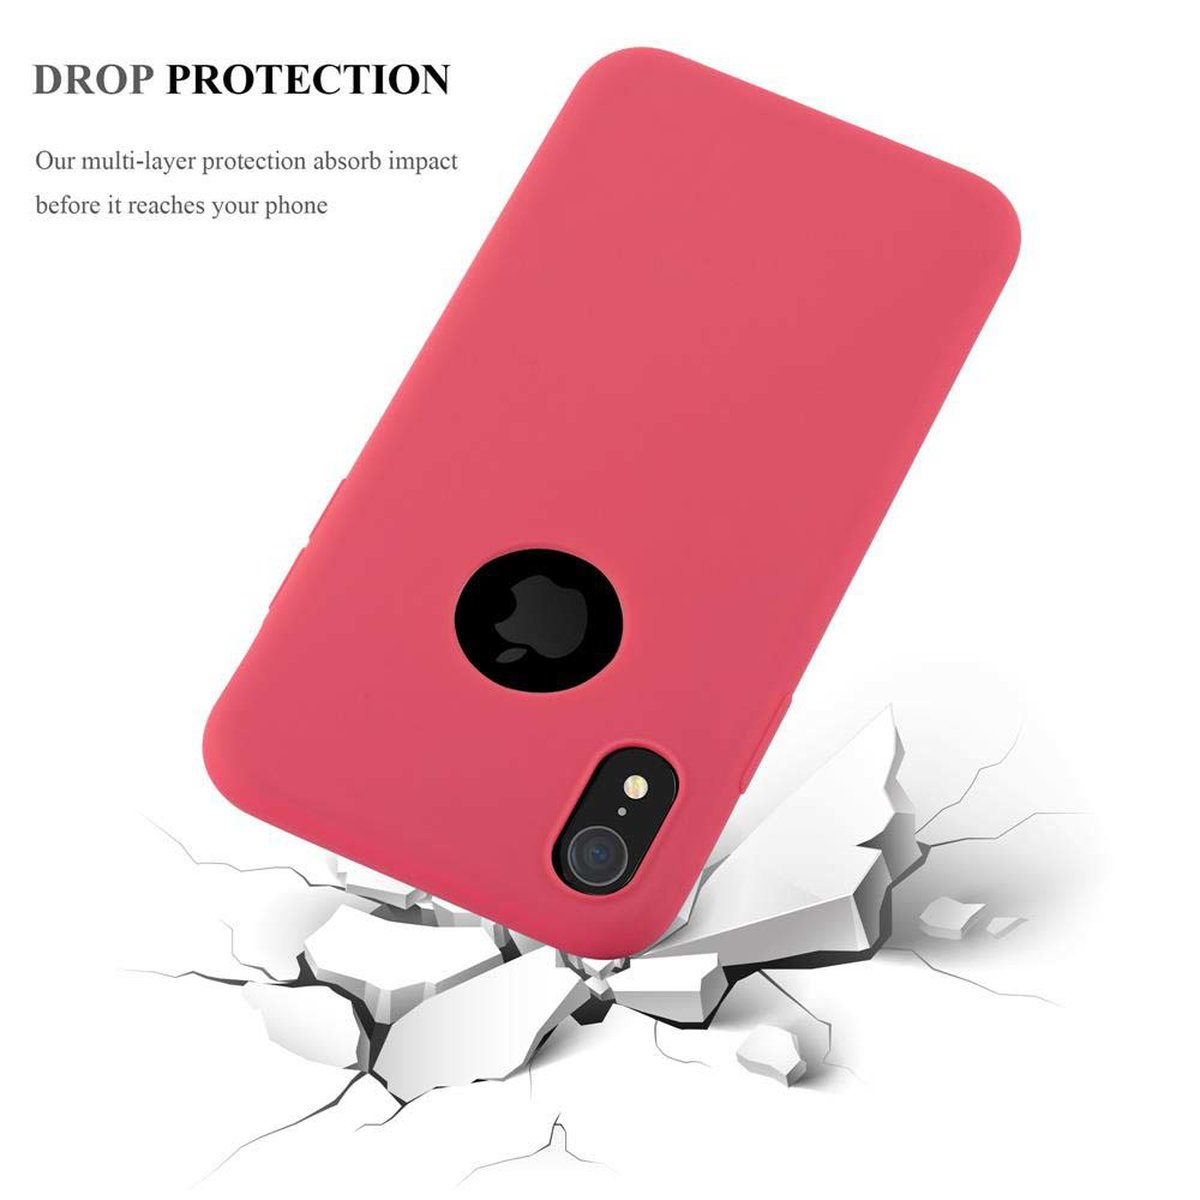 TPU ROT XR, im Apple, Hülle CADORABO iPhone CANDY Candy Style, Backcover,